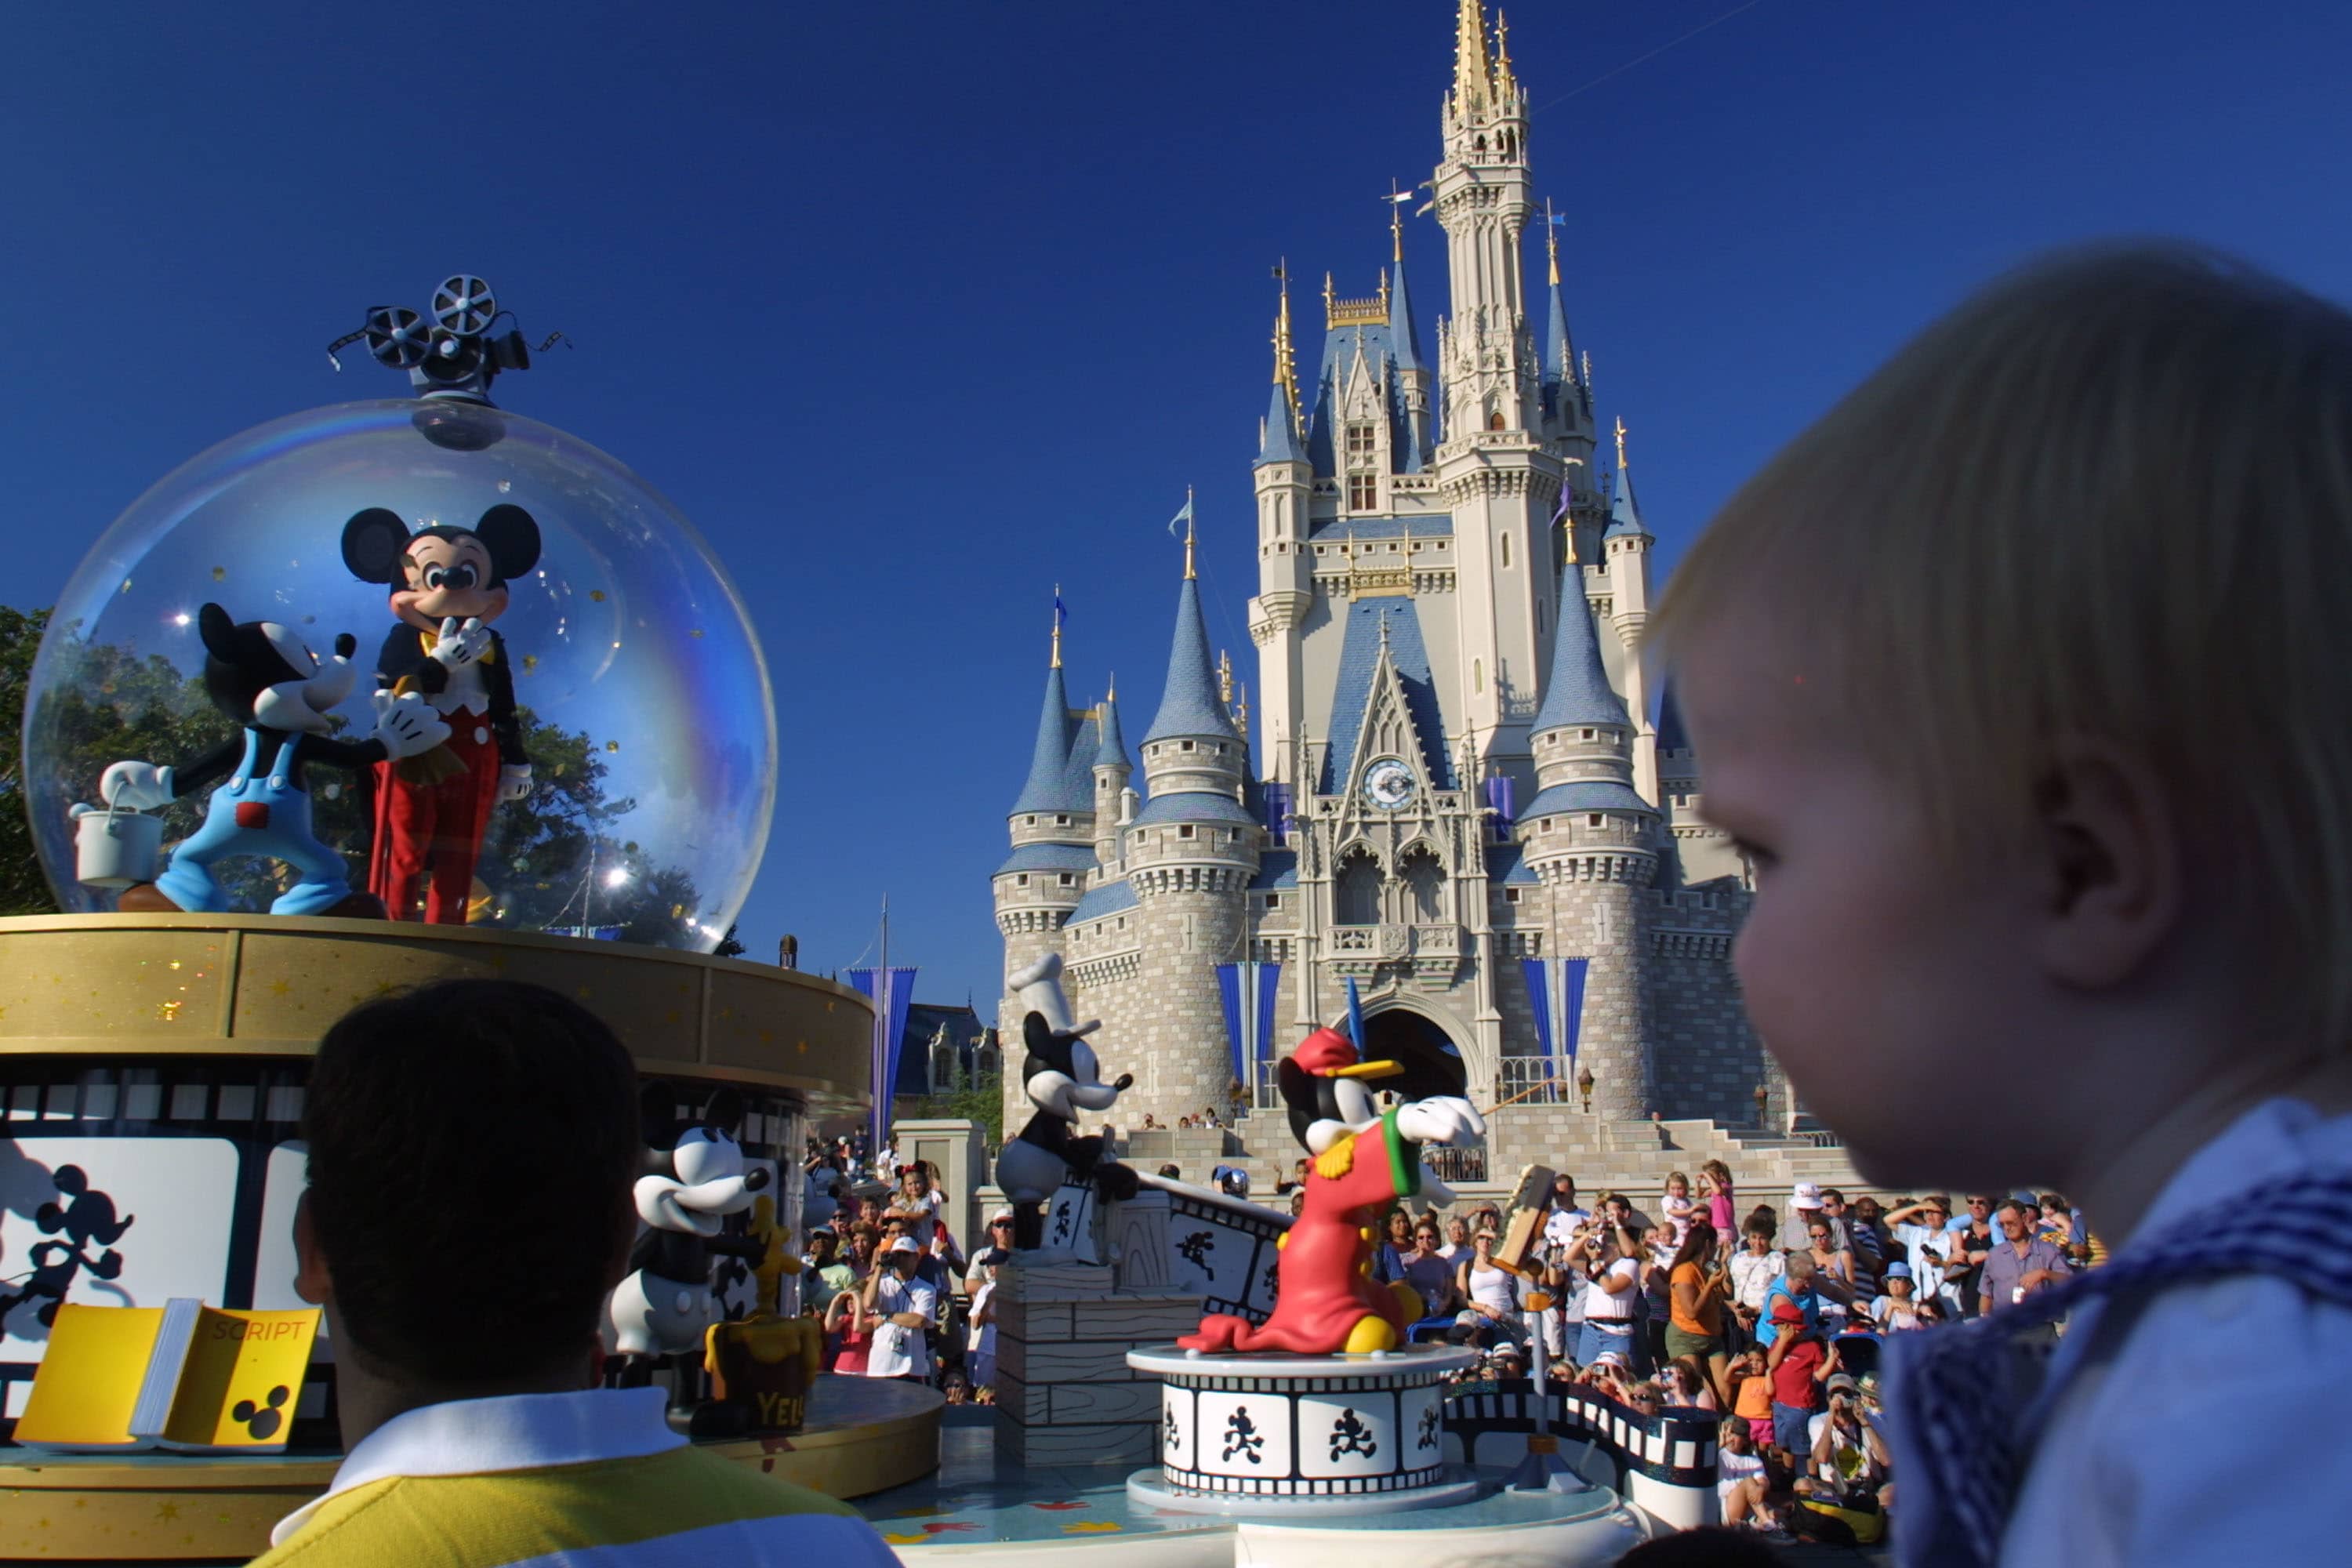 Cheap Disney shares set to rise 30% the next 12 months on strong film slate, Deutsche Bank says